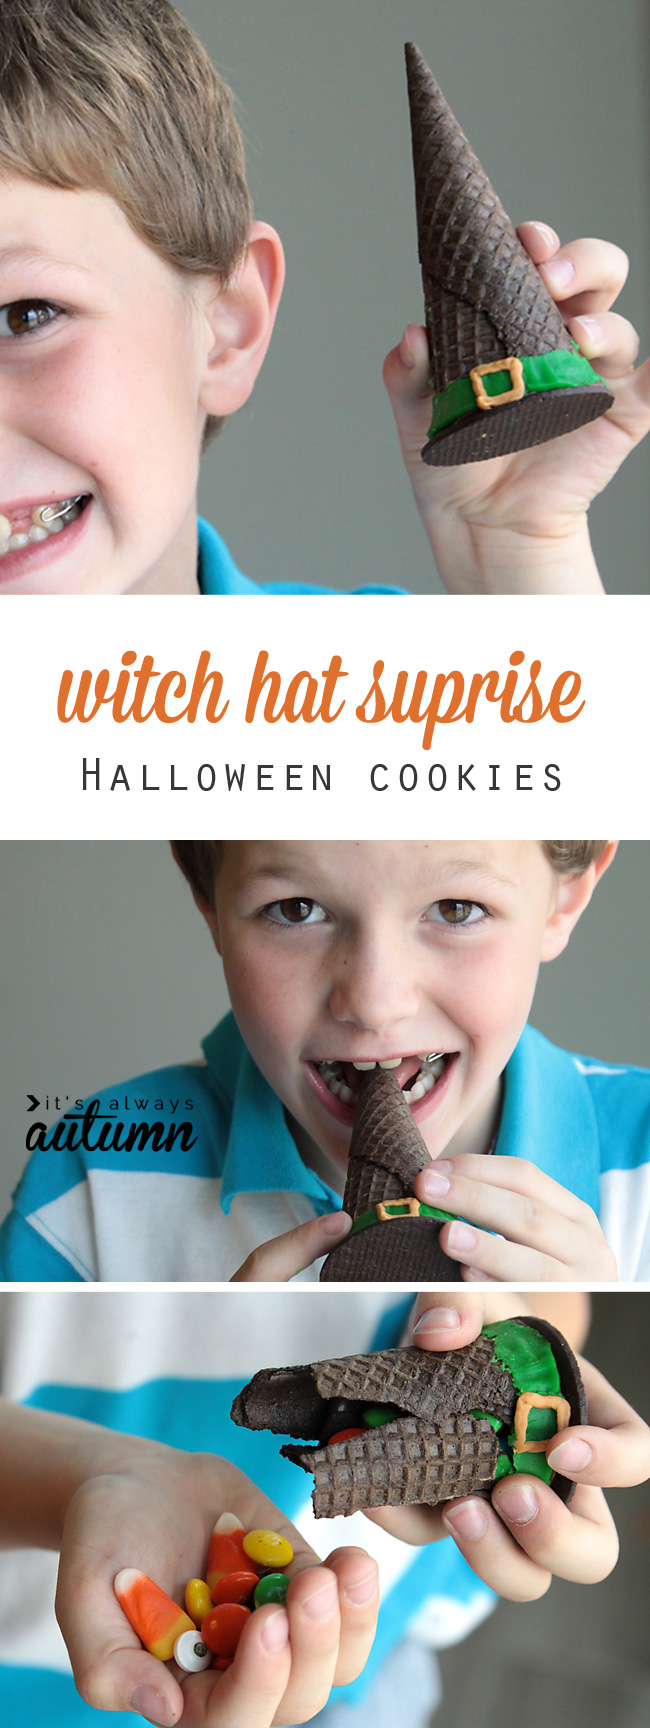 boy eating a cookie that looks like a witch hat